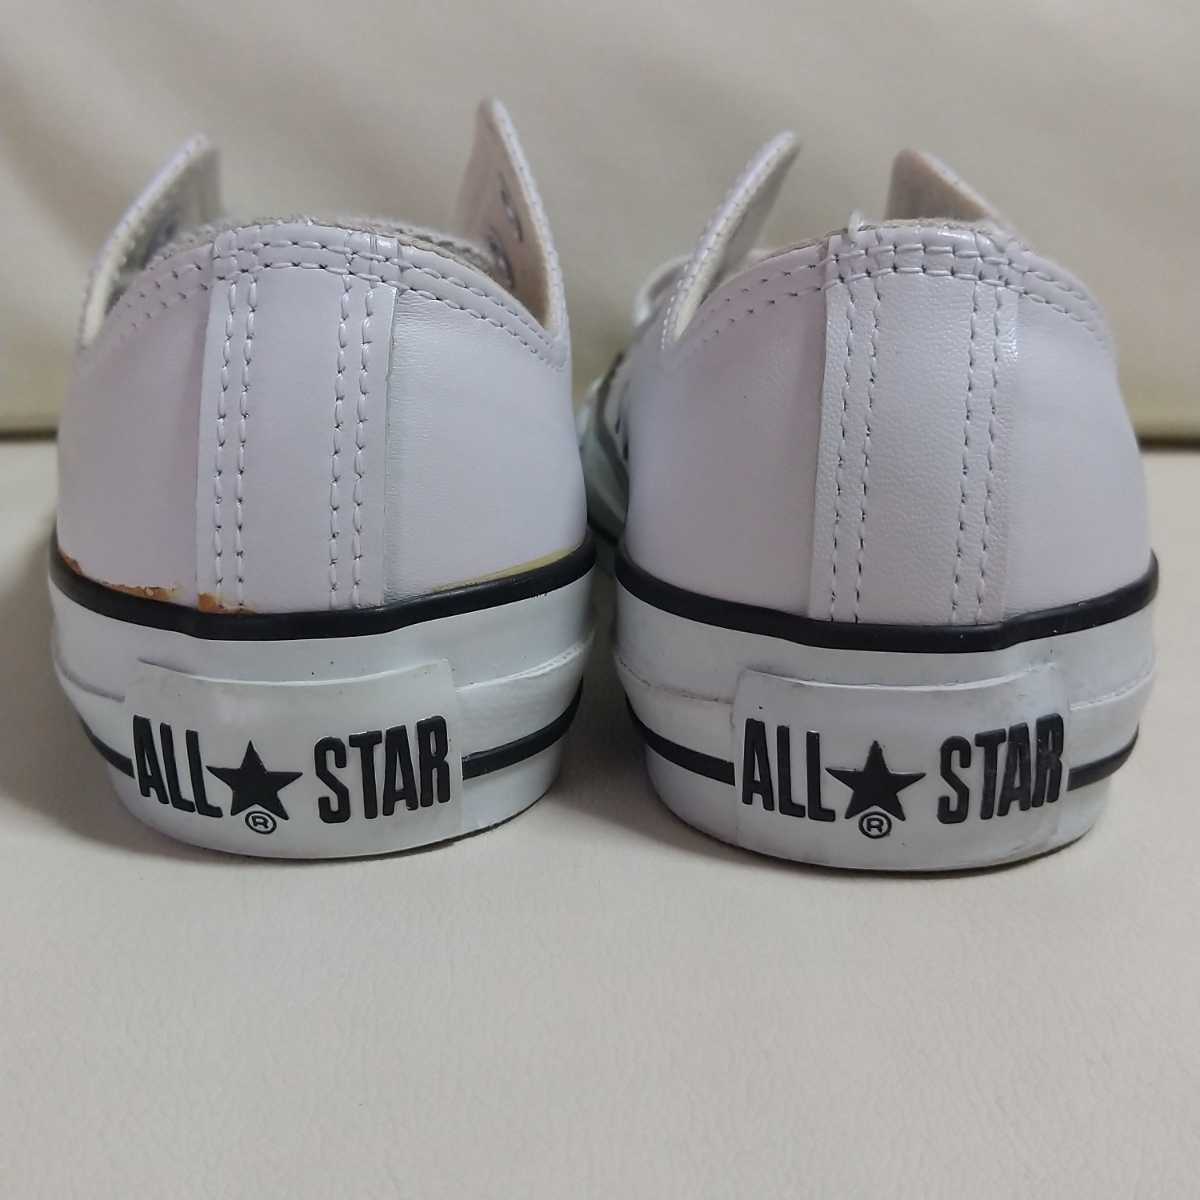 # prompt decision with translation new goods Converse all Star low Lo 22cm leather low cut white 1F